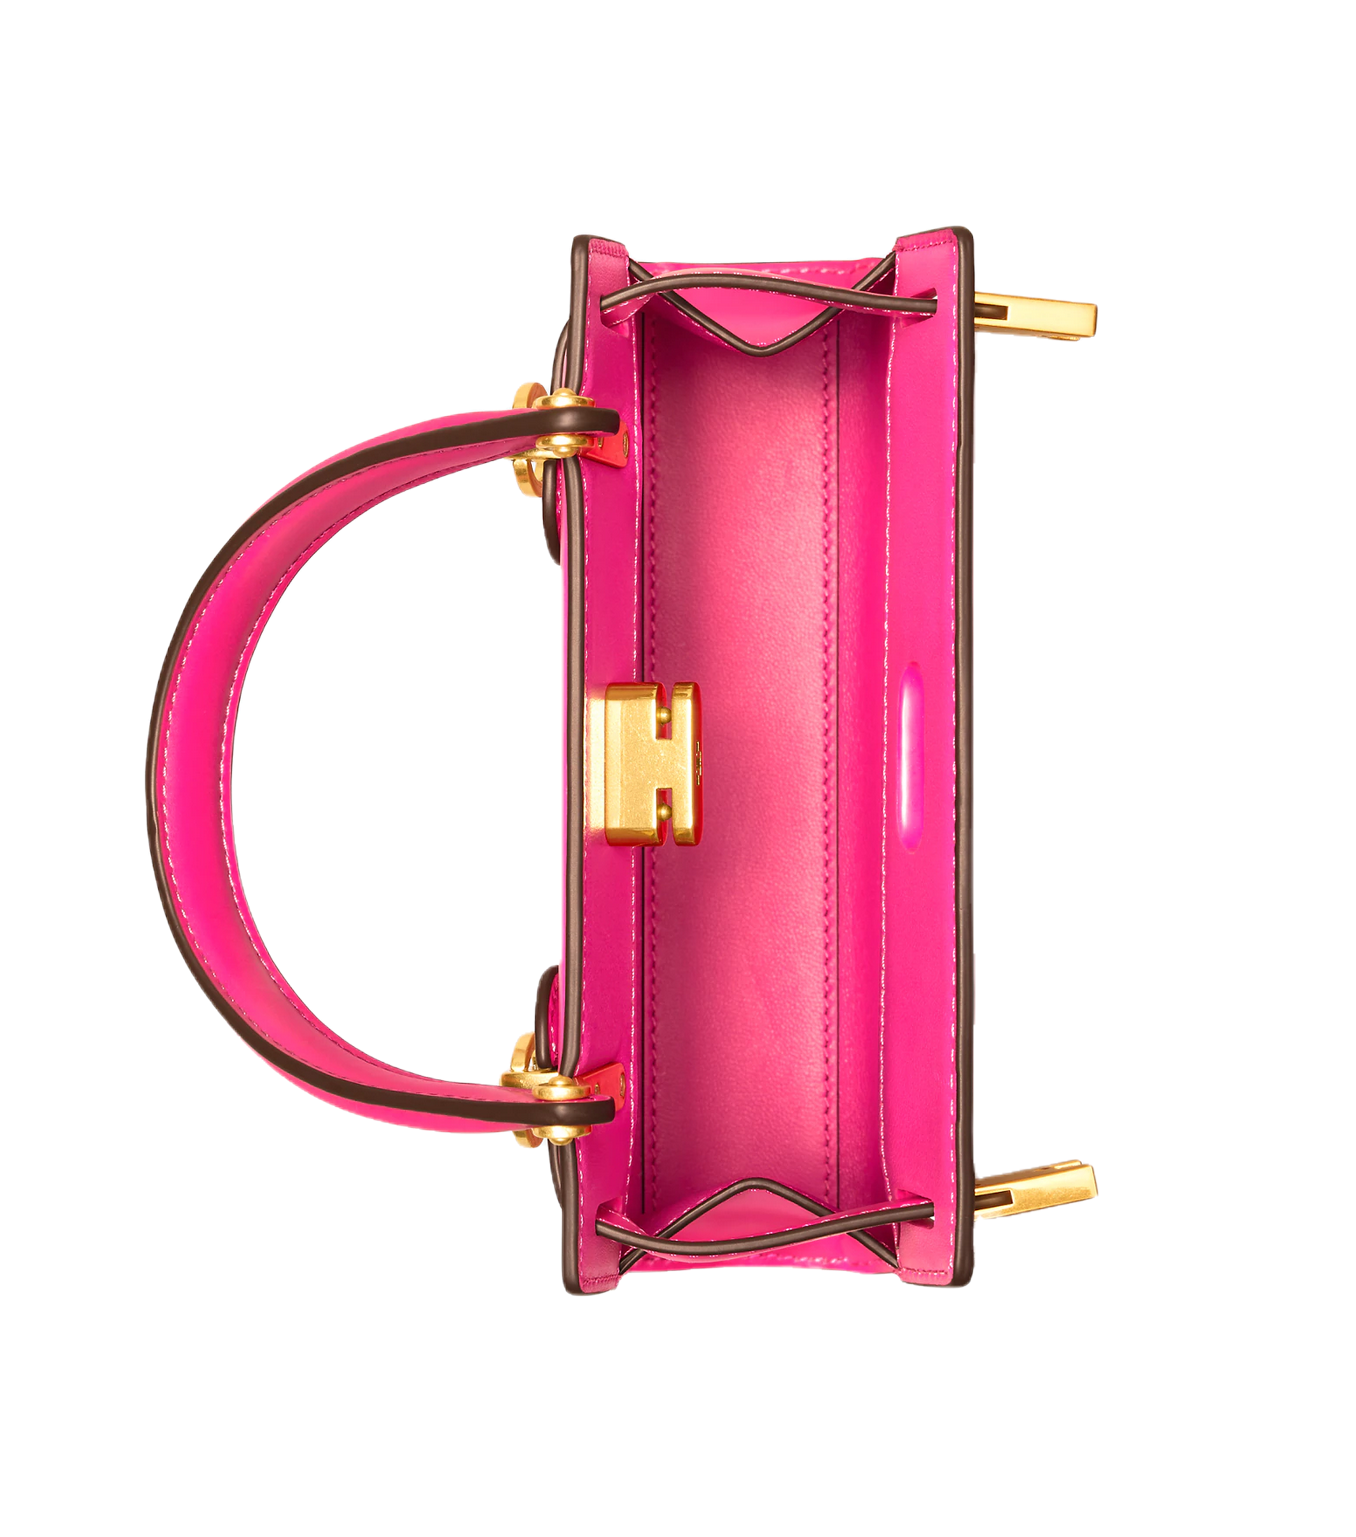 Crazy Pink Lee Radziwill Petite Bag by Tory Burch Accessories for